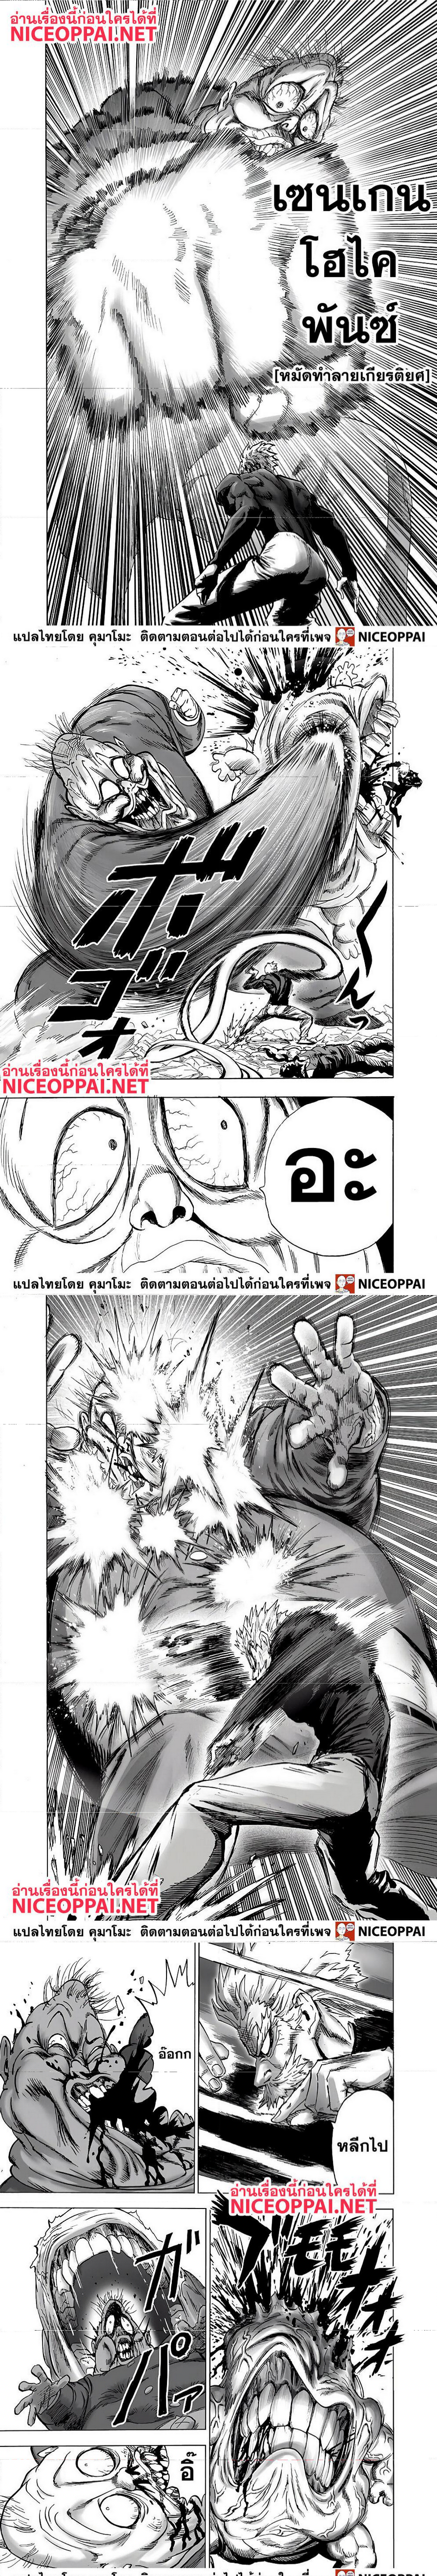 One Punch Man144.2 (5)